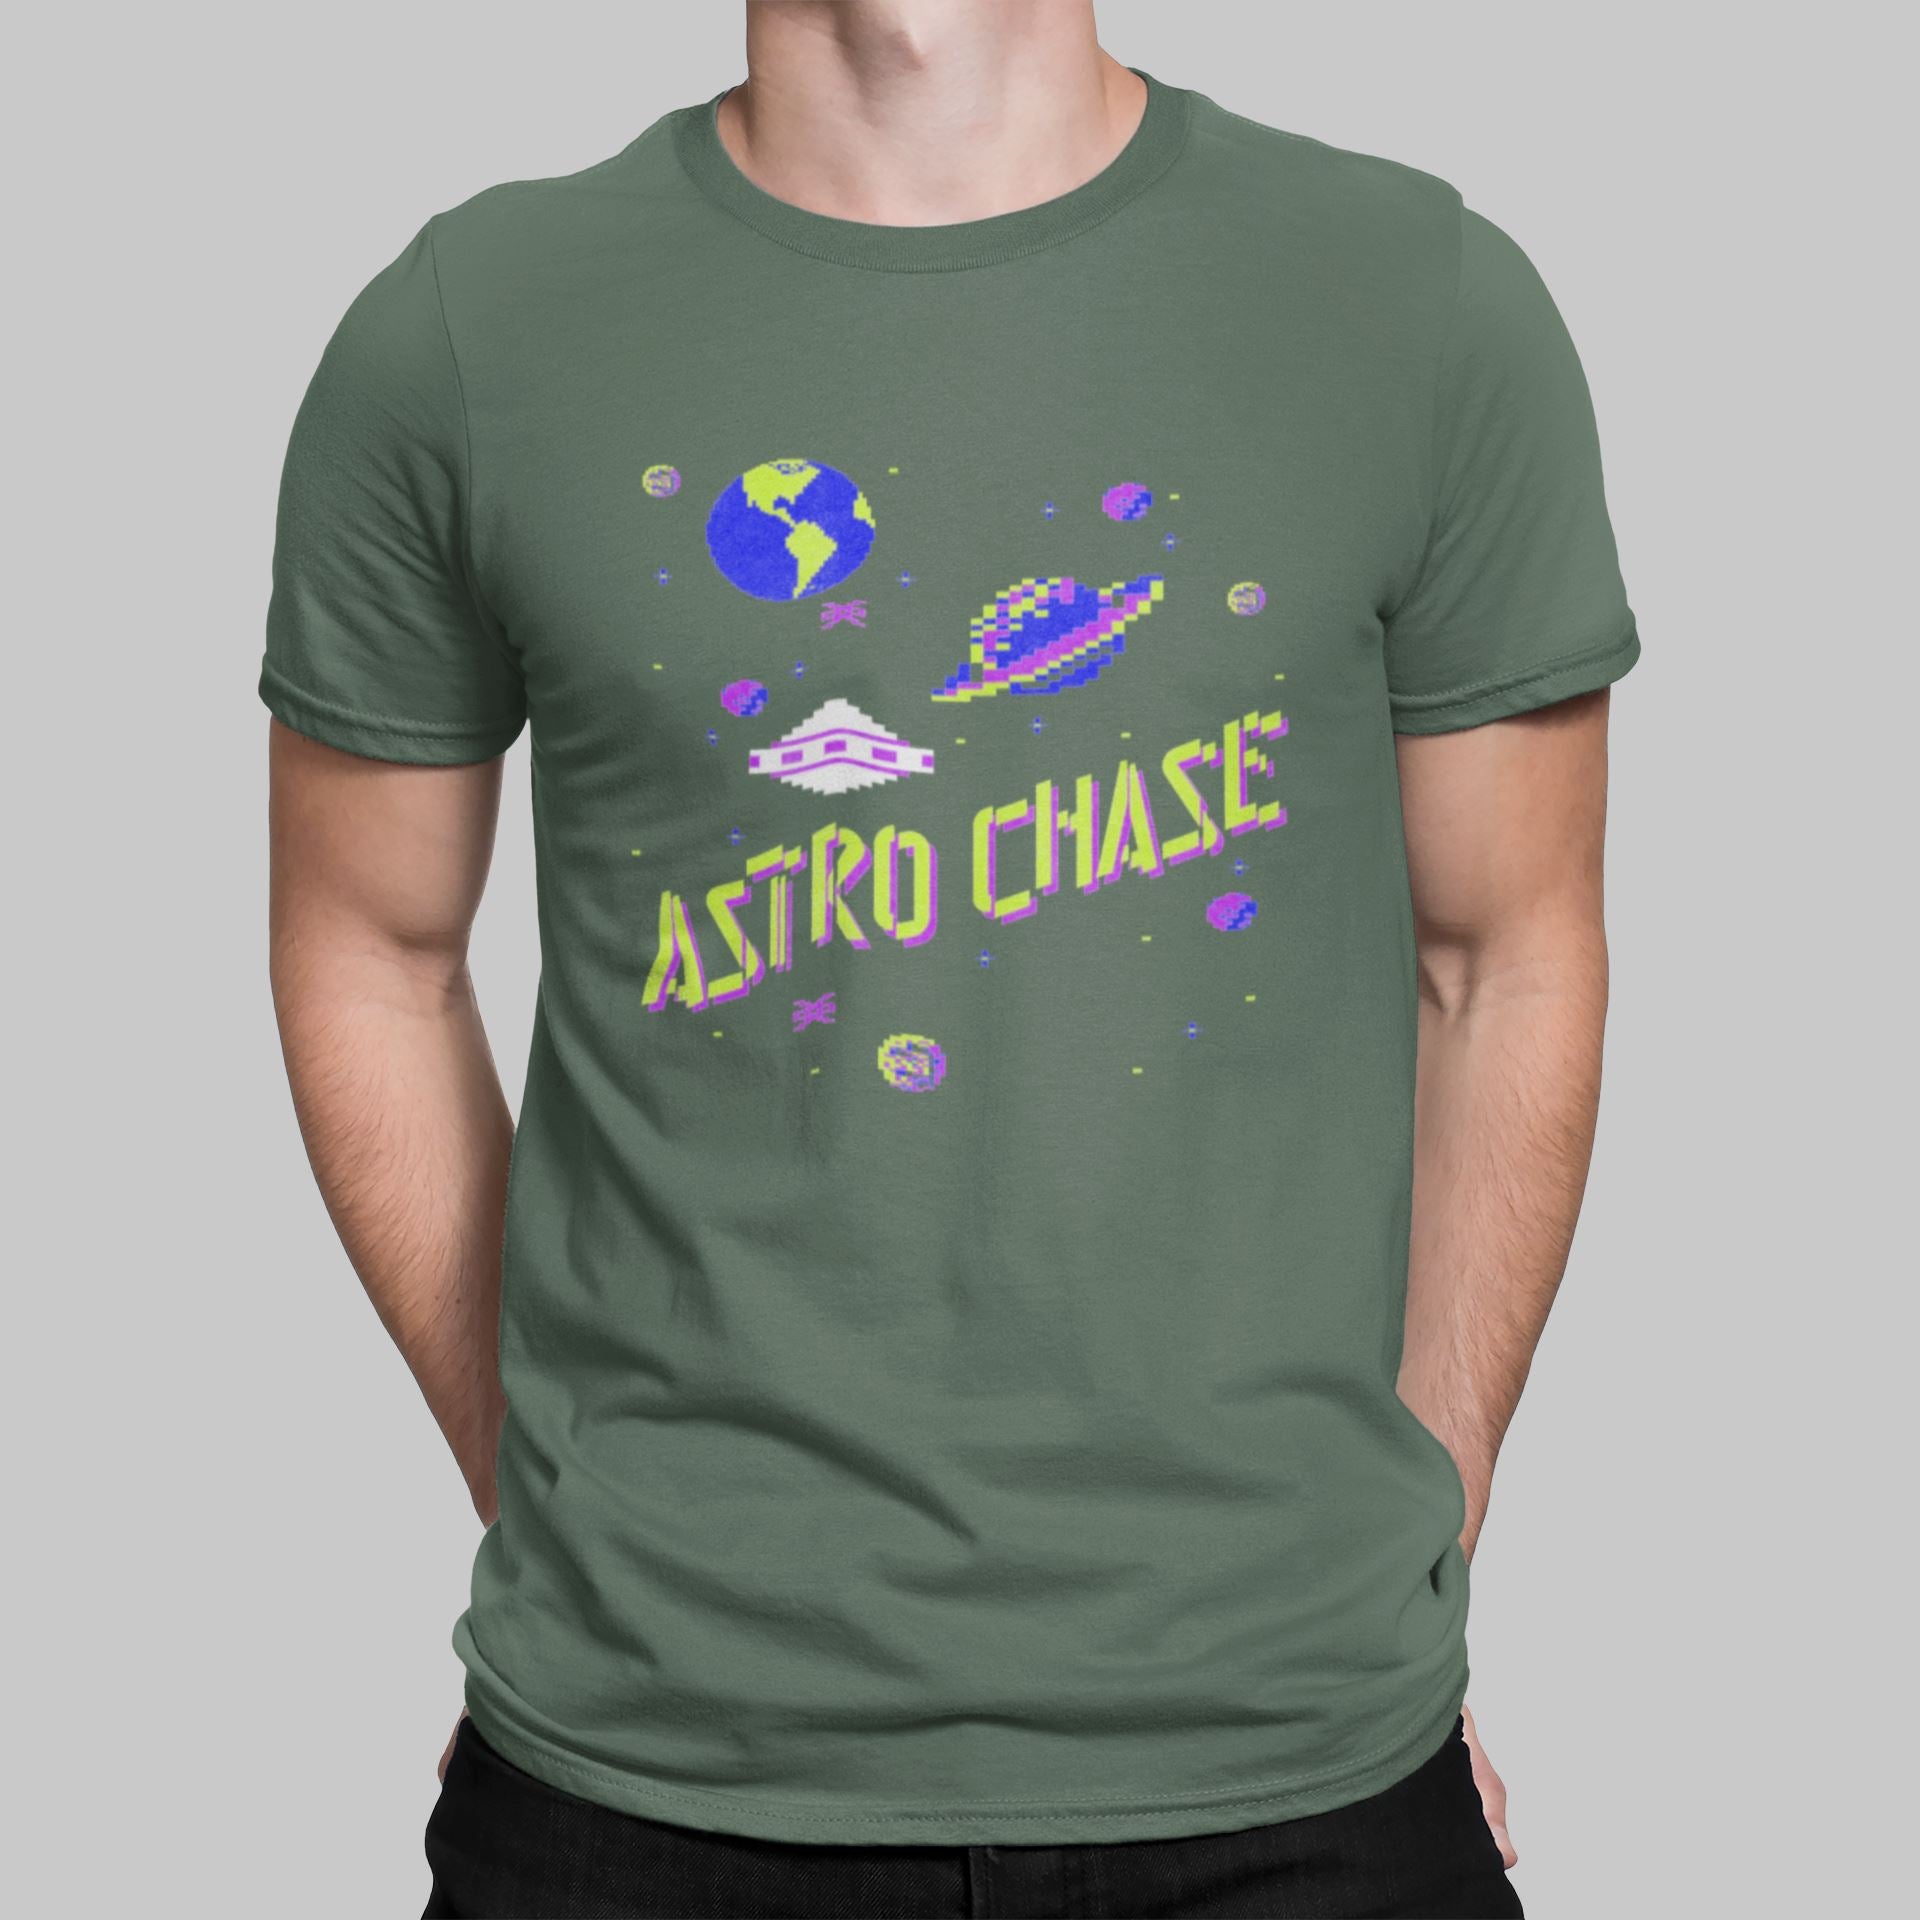 Astro Chase Retro Gaming T-Shirt T-Shirt Seven Squared Small 34-36" Military Green 